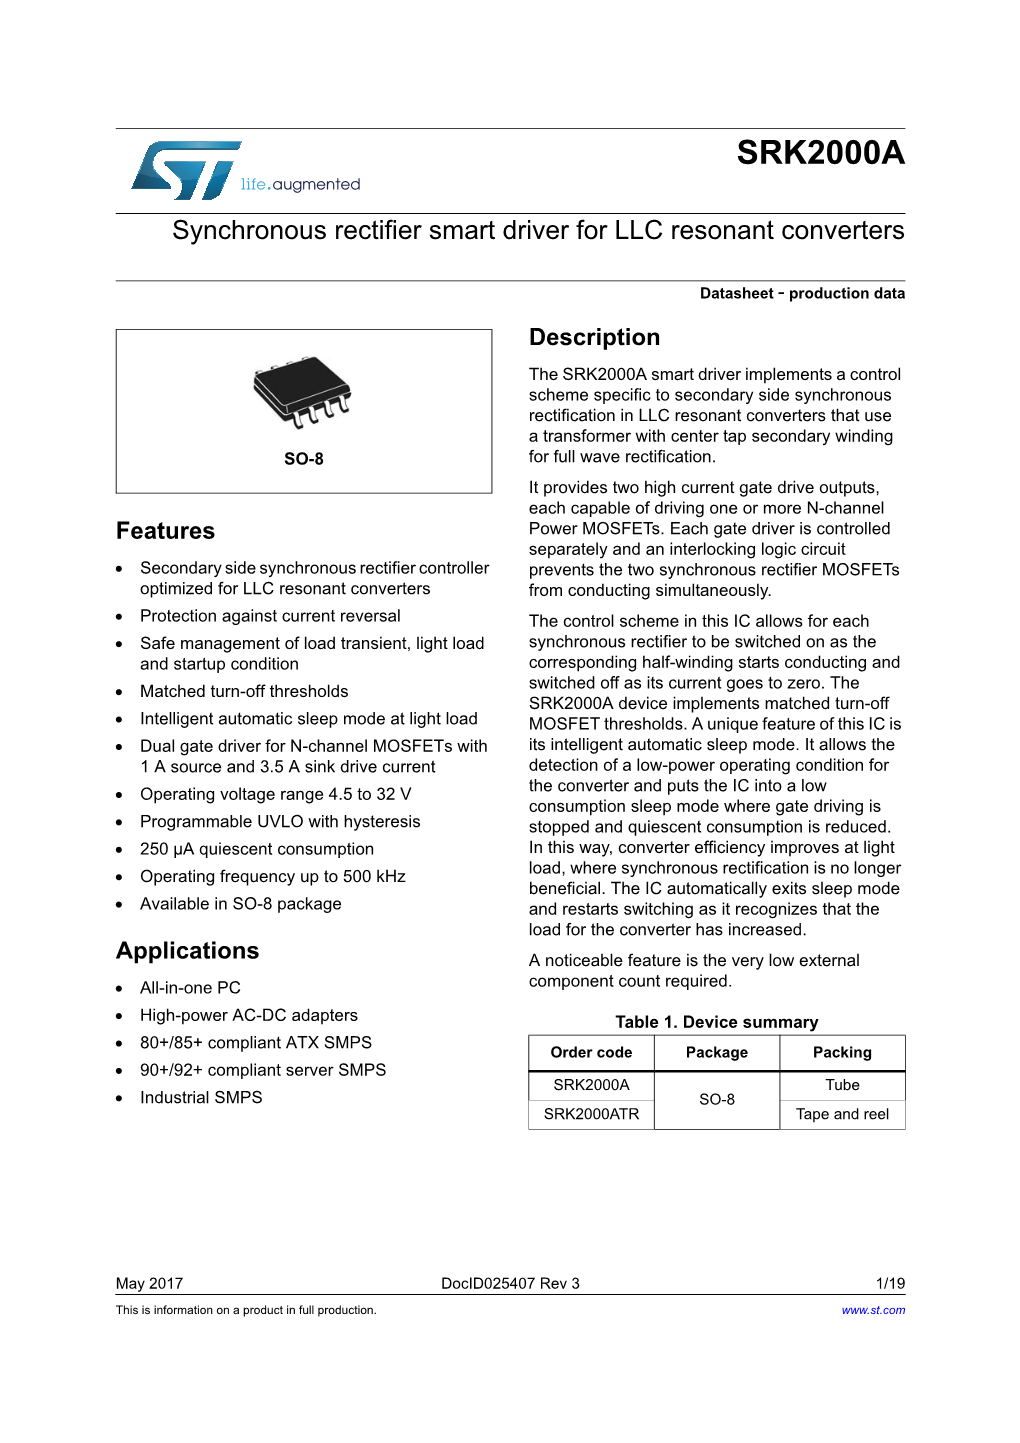 Synchronous Rectifier Smart Driver for LLC Resonant Converters